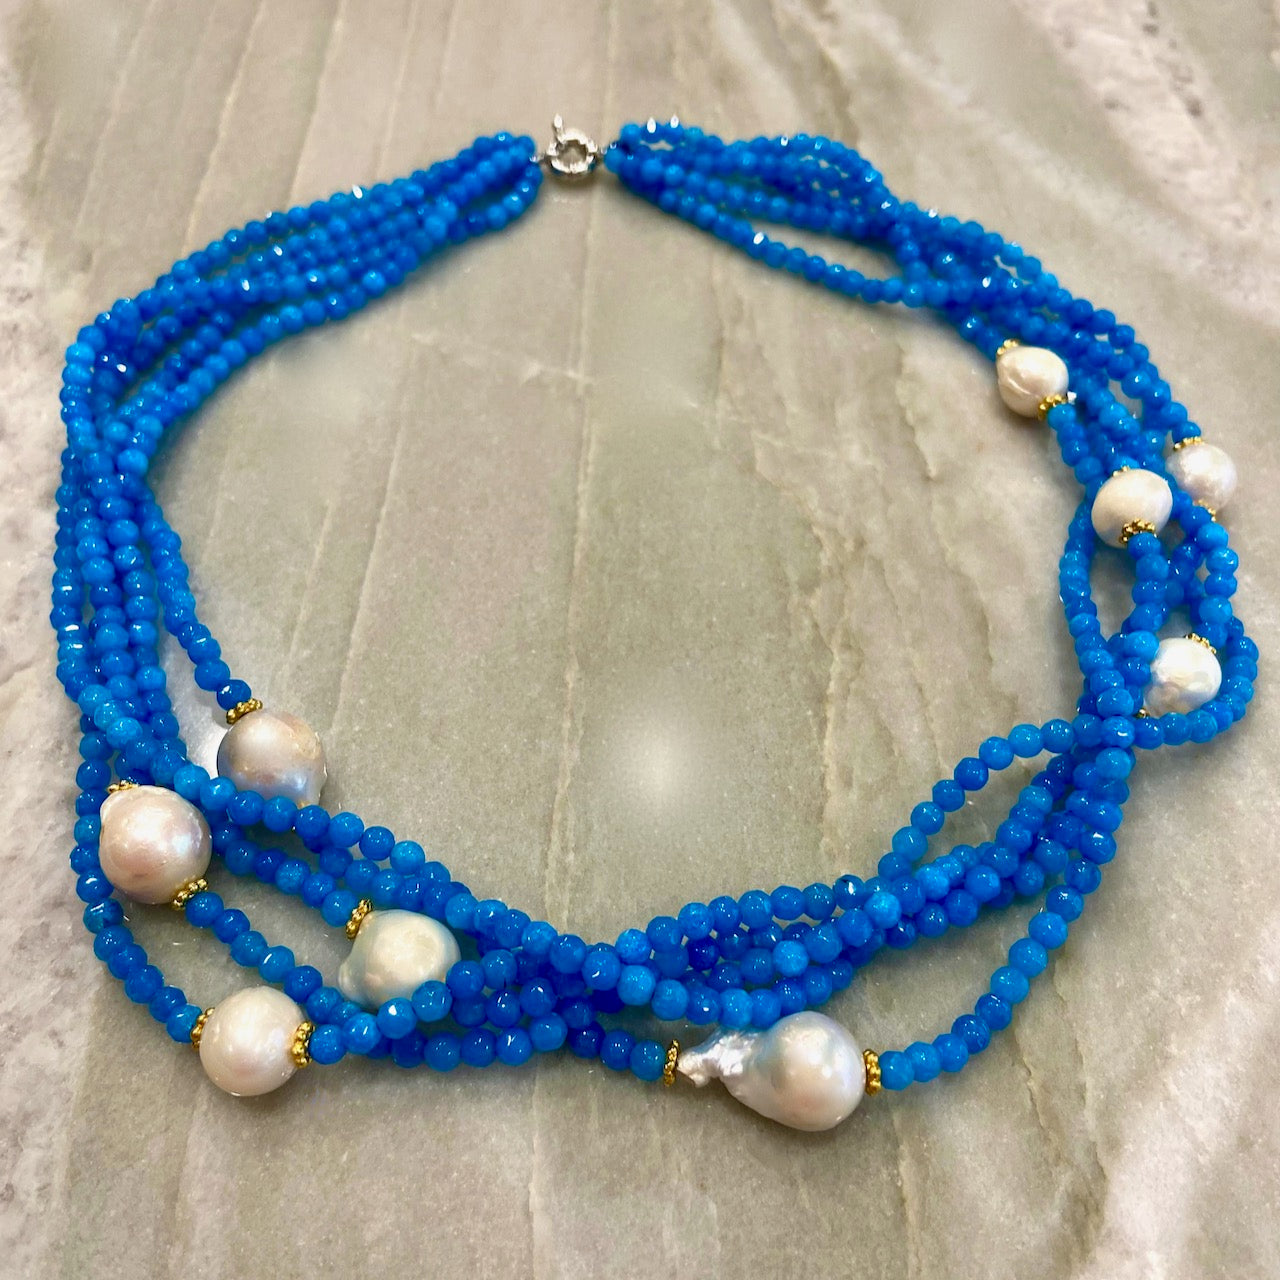 Blue Apatite Gemstones and Freshwater Pearls 5-Strand Statement Necklace 20"